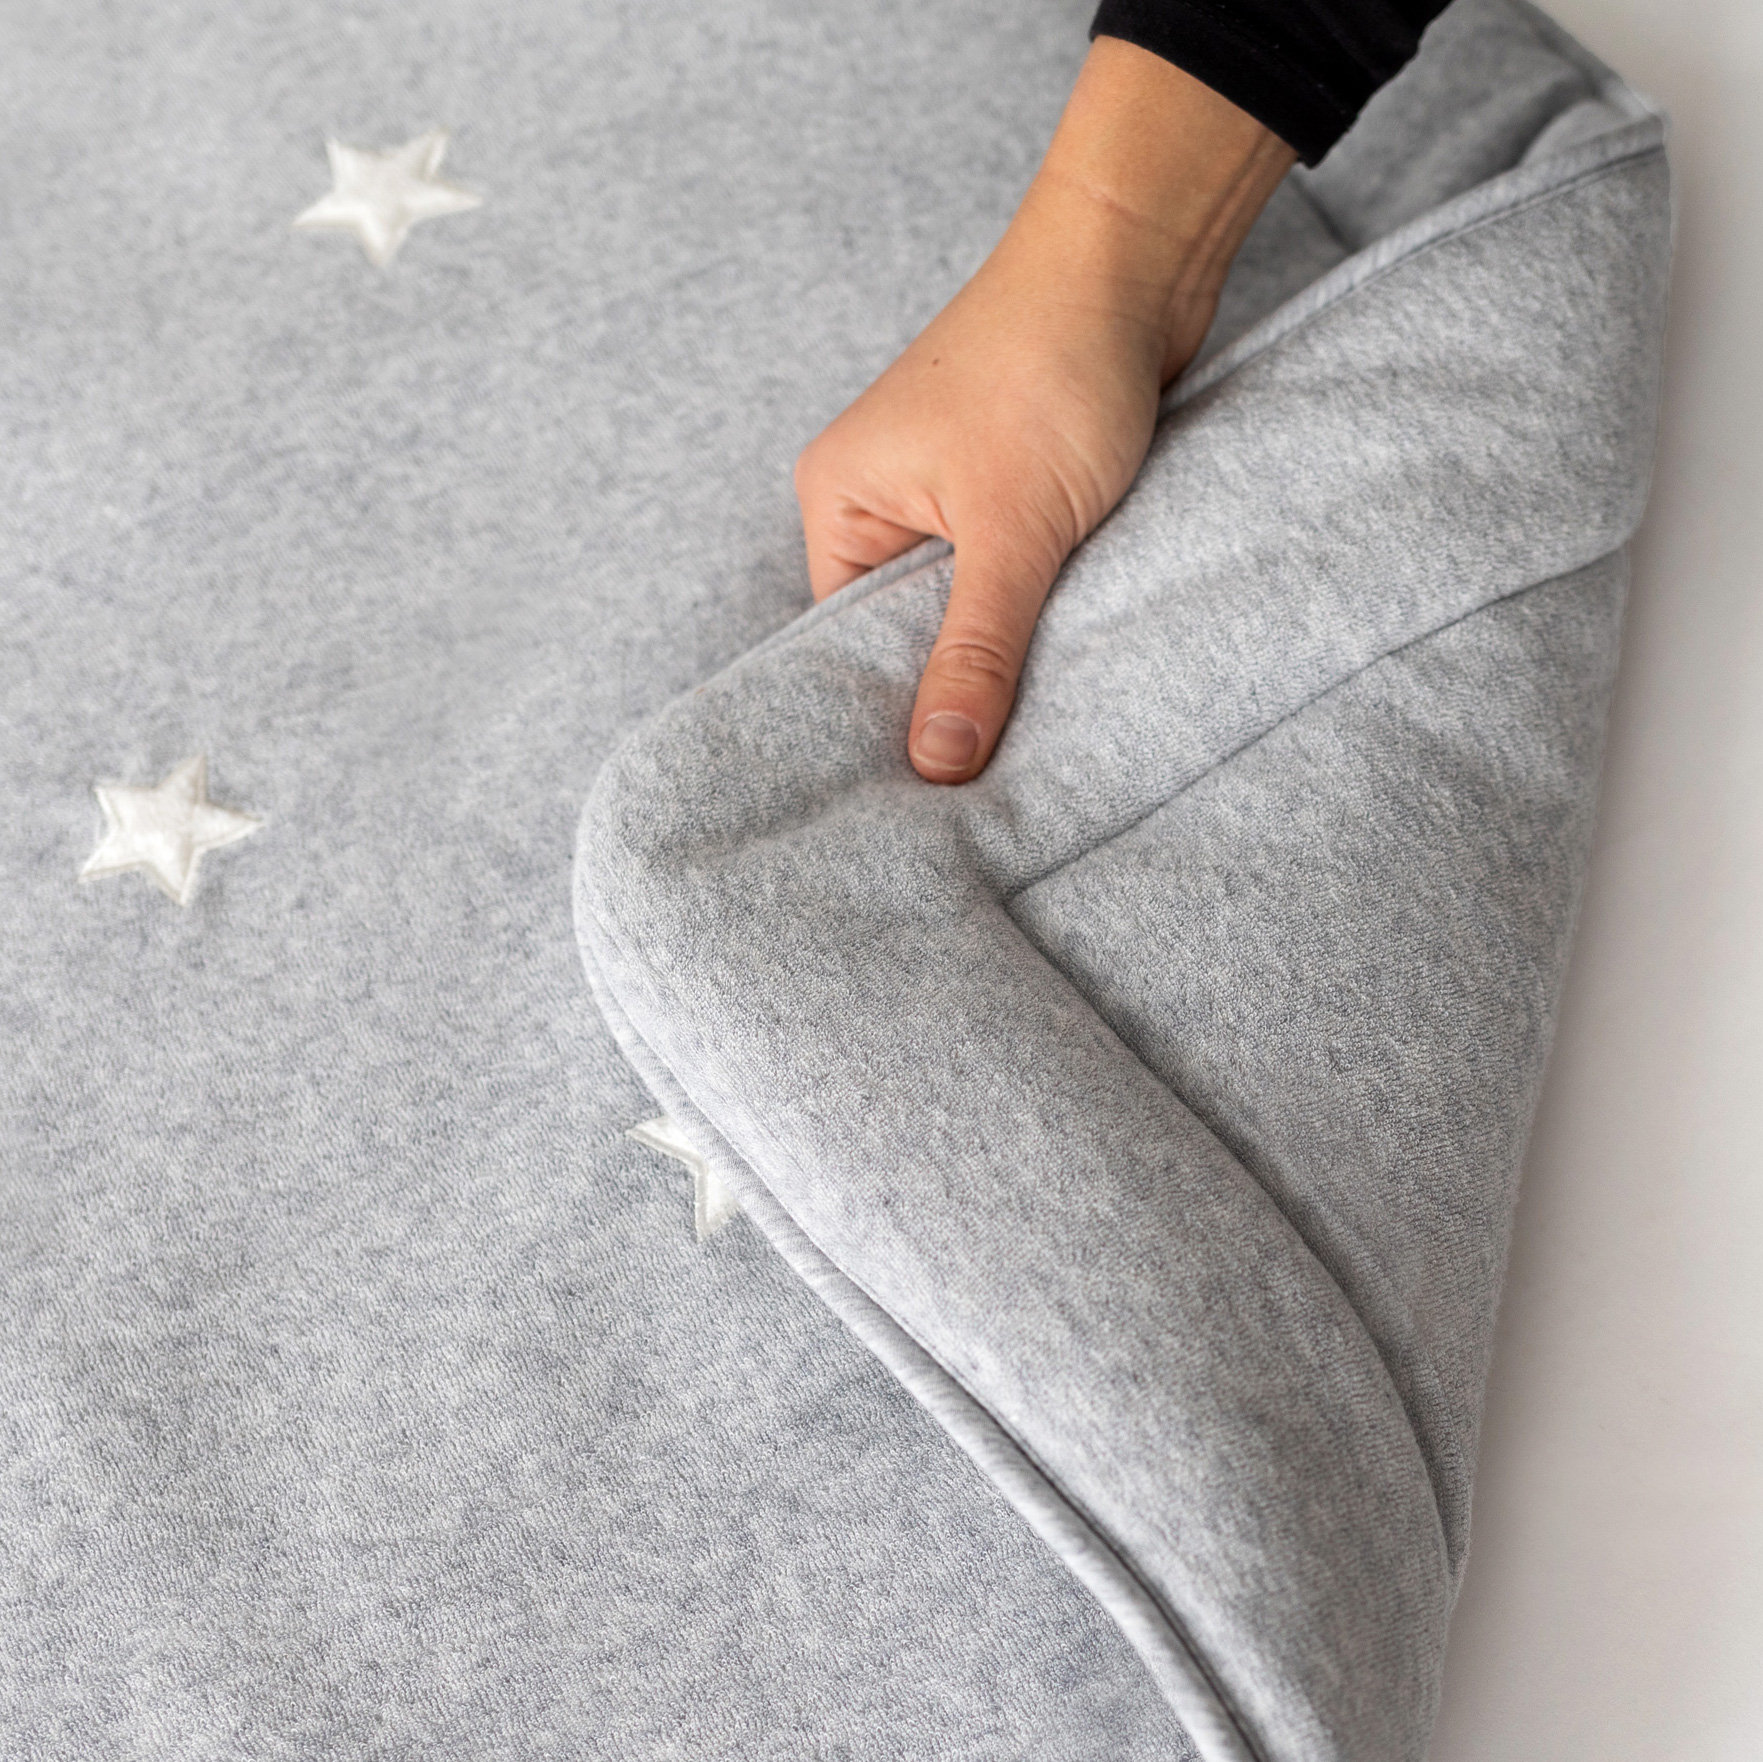 Padded play mat Pady terry + terry 75x95cm STARY Grey marled